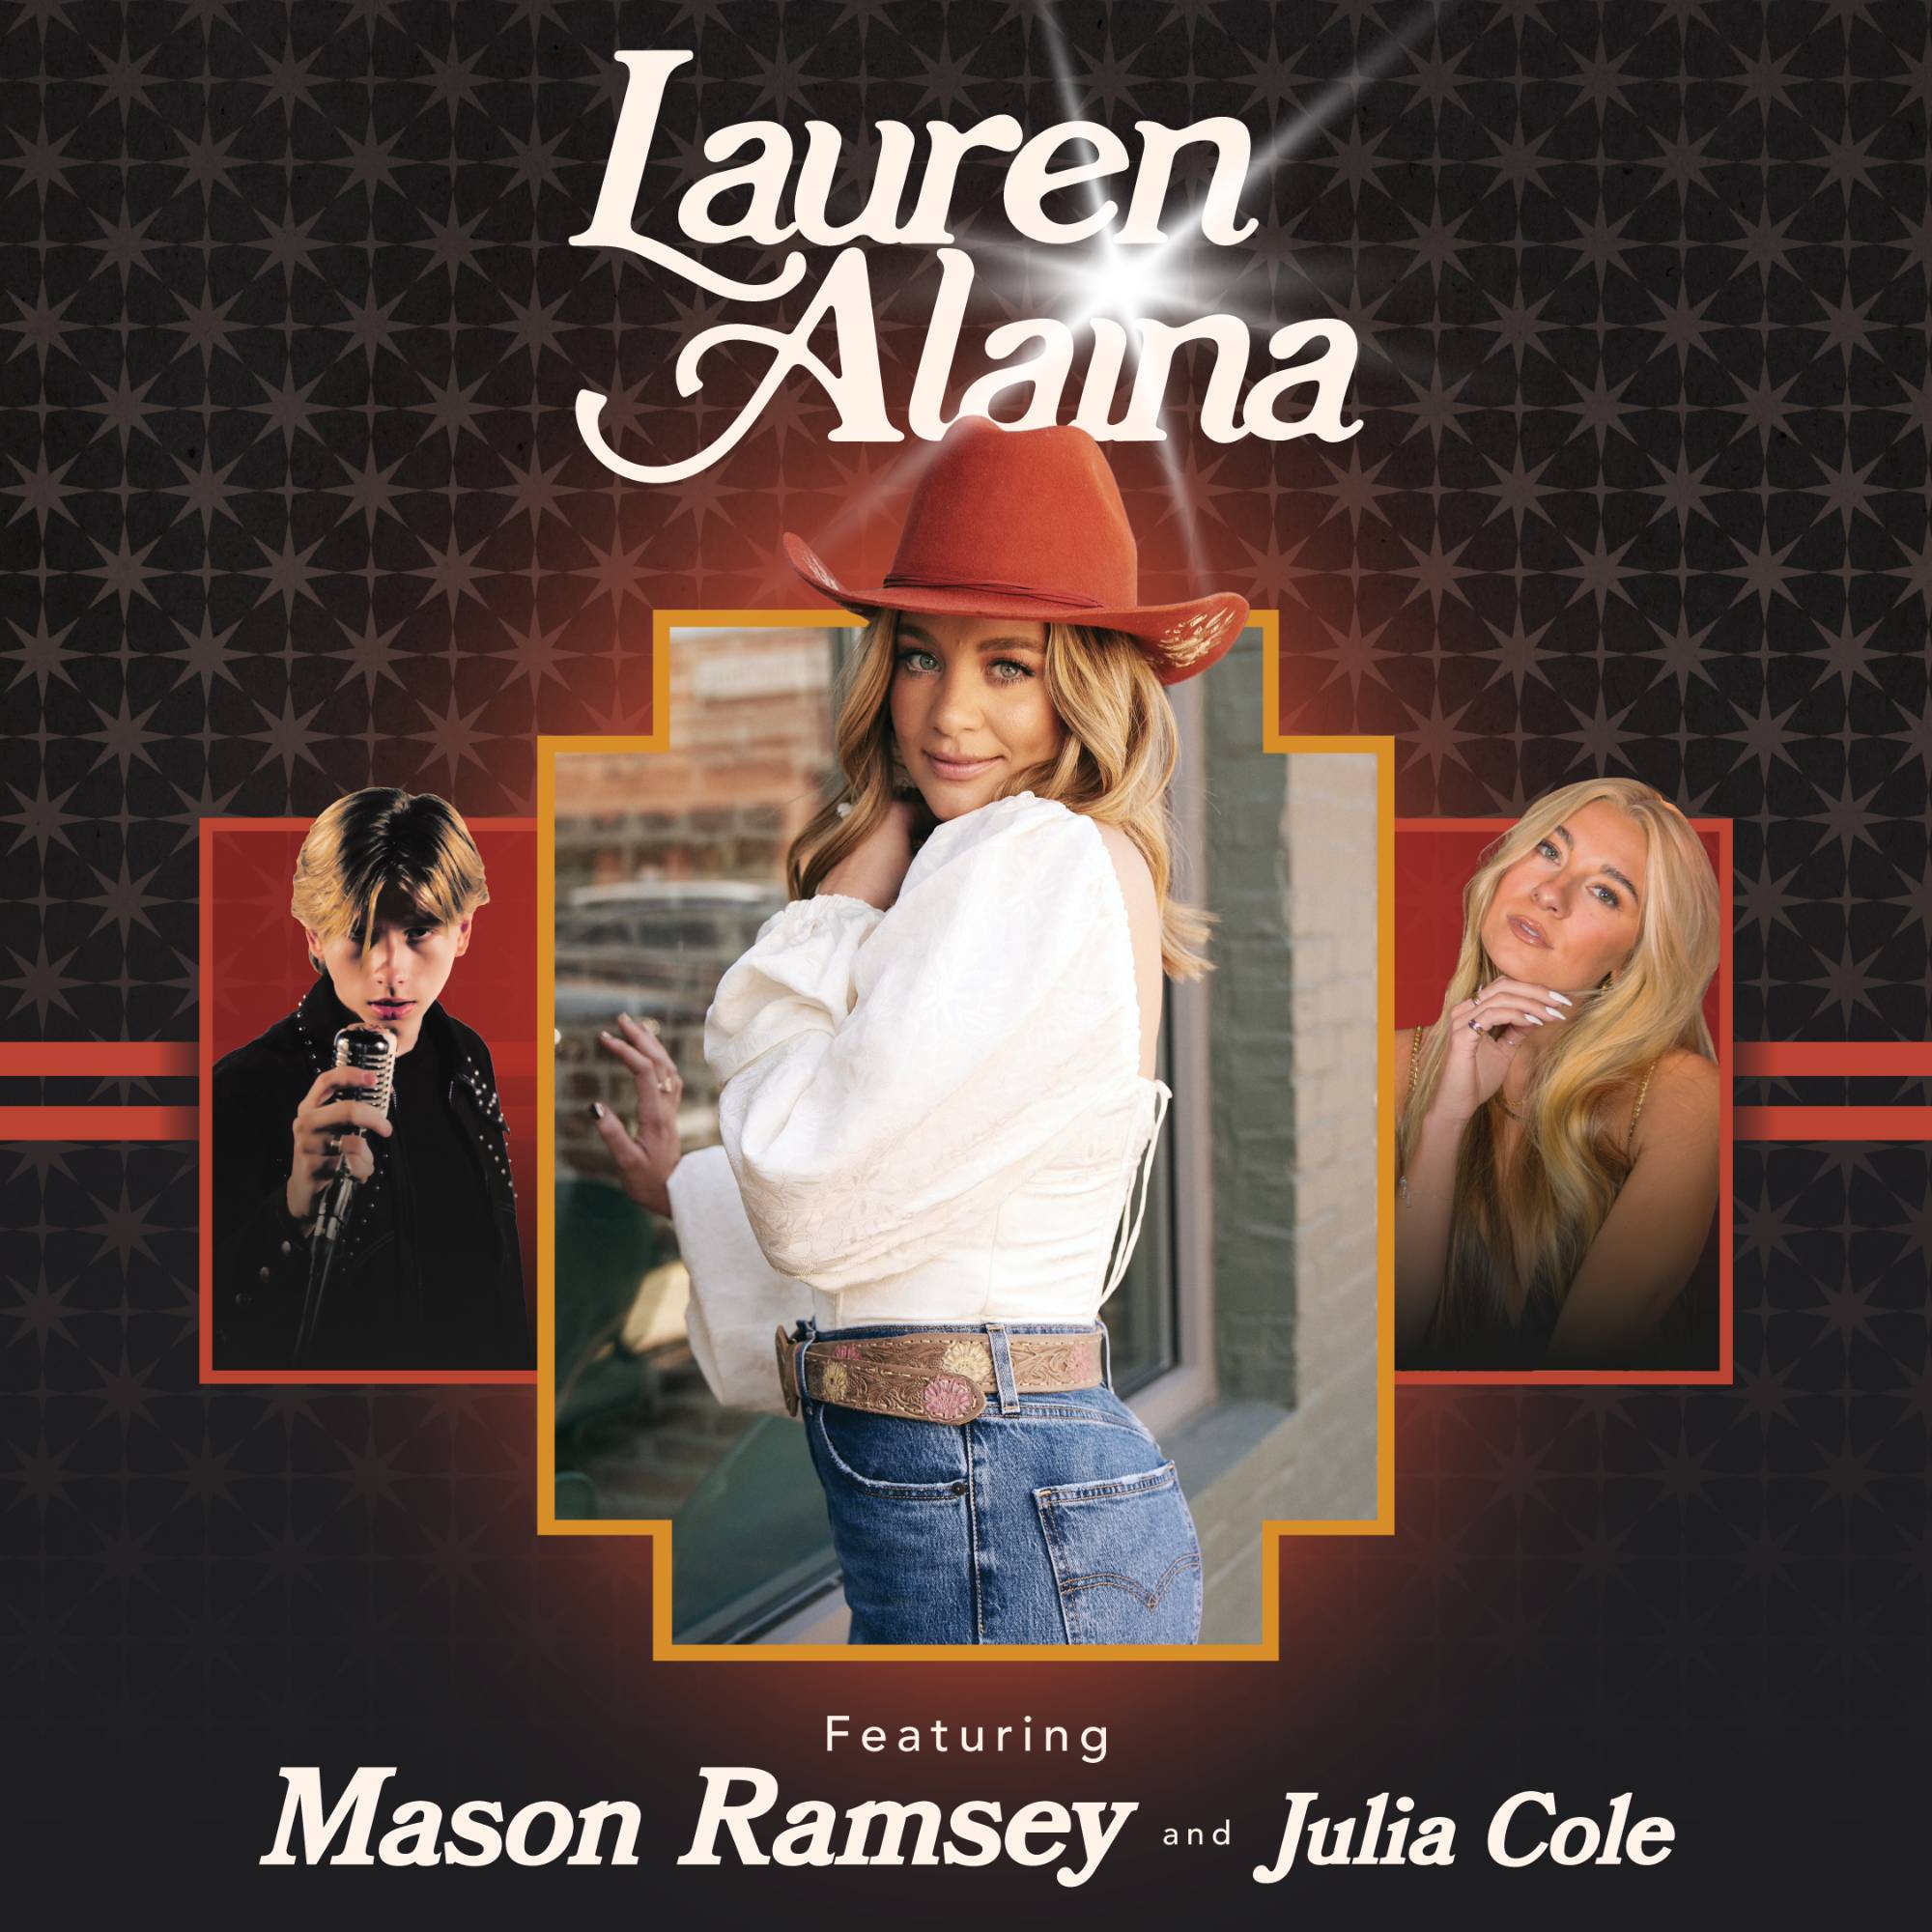 Lauren Alaina, Julia Cole, and Mason Ramsey with text that reads "Lauren Alaina featuring Mason Ramsey and Julia Cole"